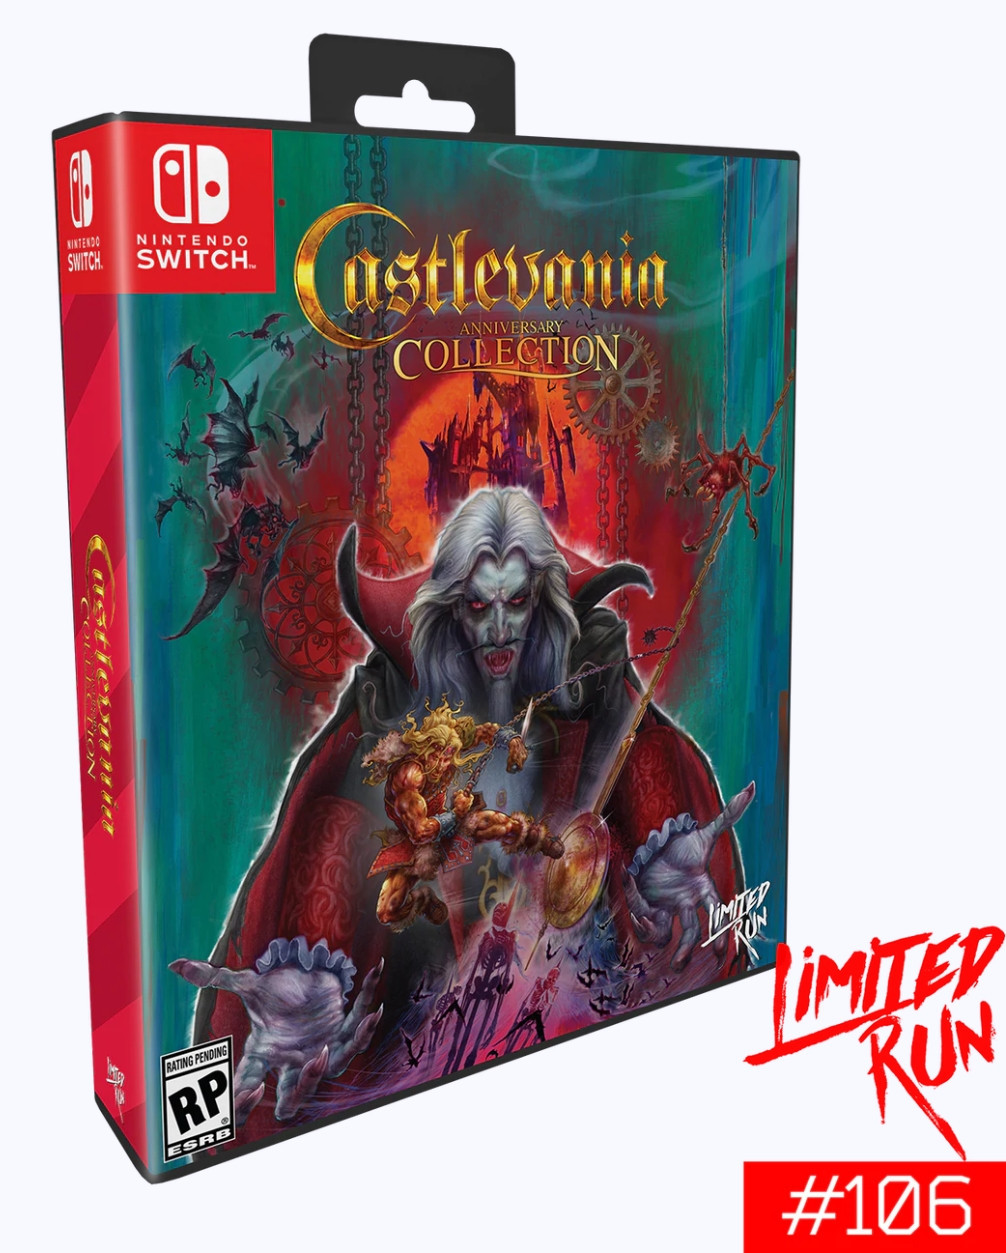 Castlevania - Anniversary Collection Bloodlines Edition (Limited Run Games)